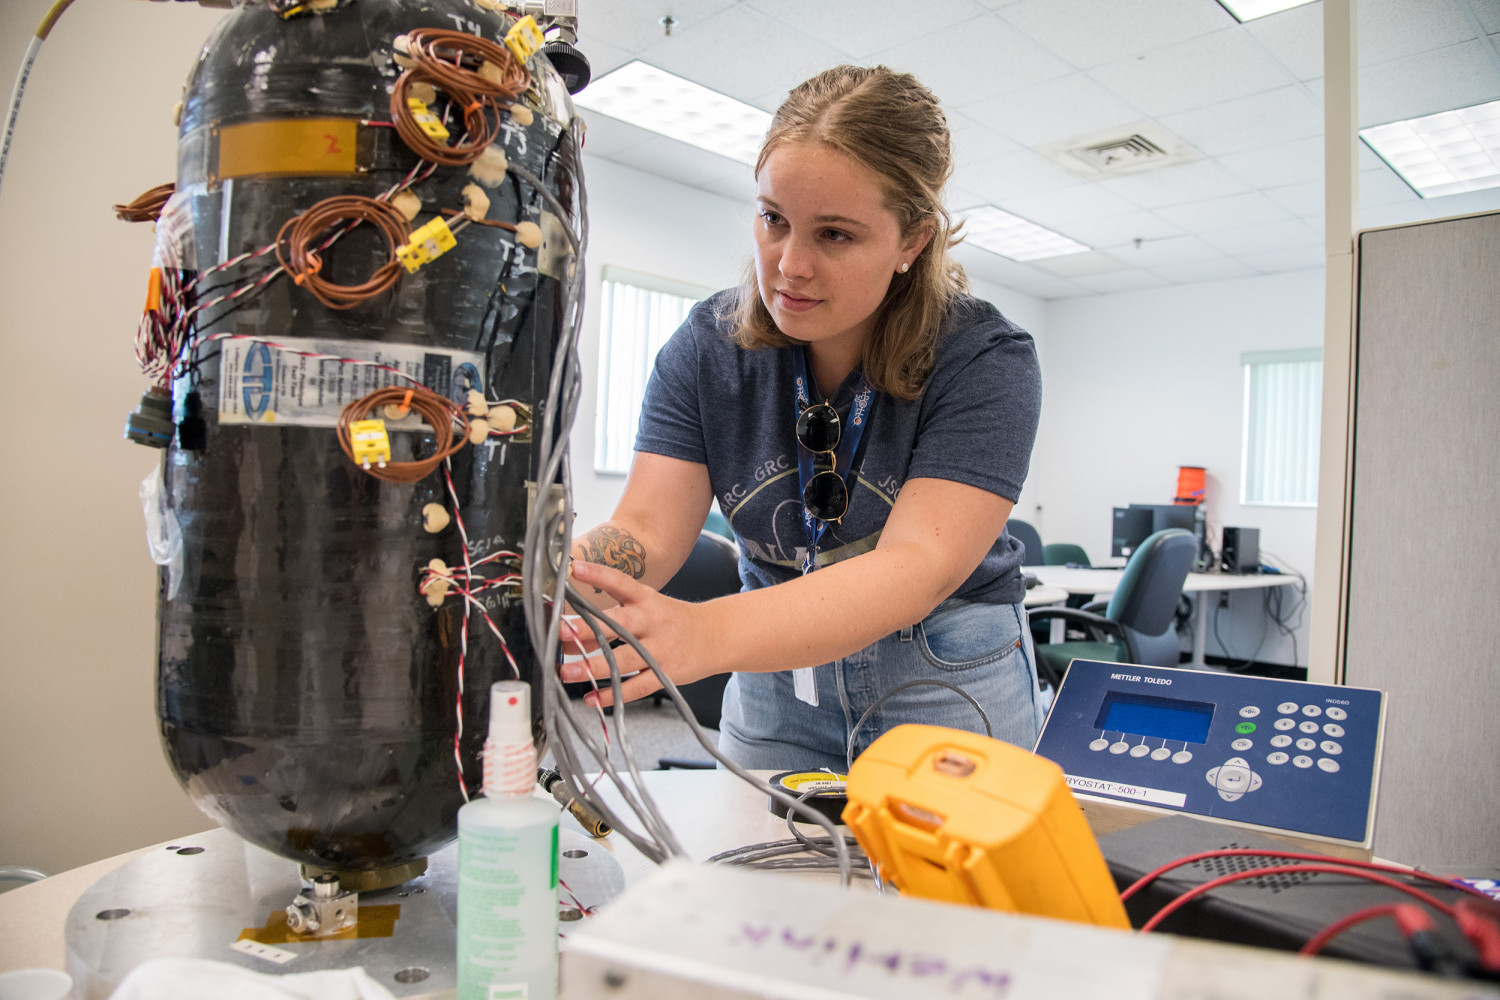 The space sciences program at Carthage is a nationally recognized undergraduate program that prov...